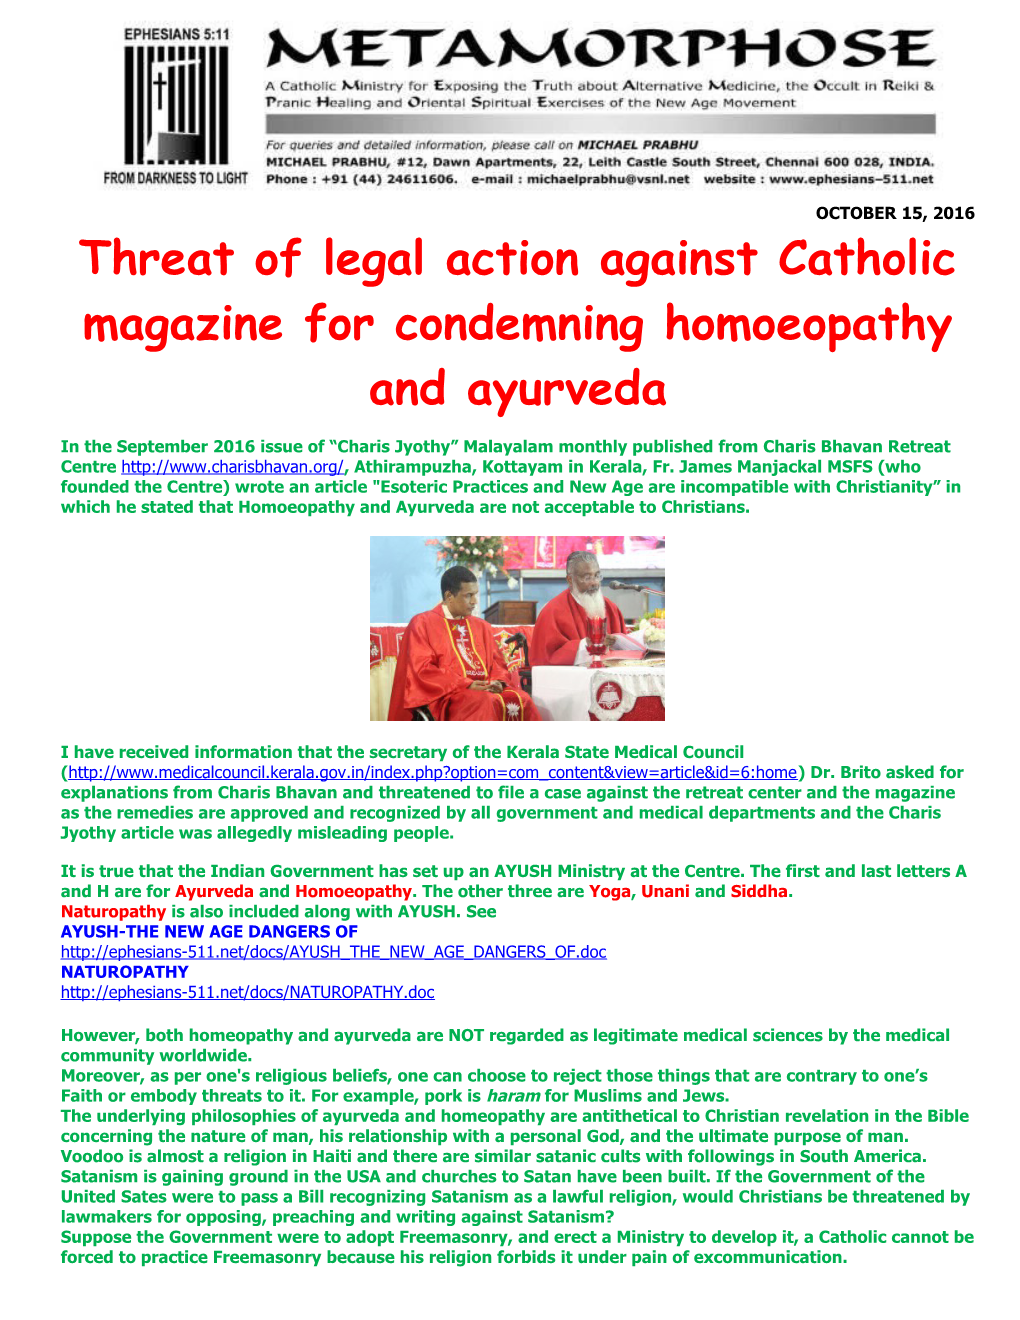 Threat of Legal Action Against Catholic Magazine for Condemning Homoeopathy and Ayurveda